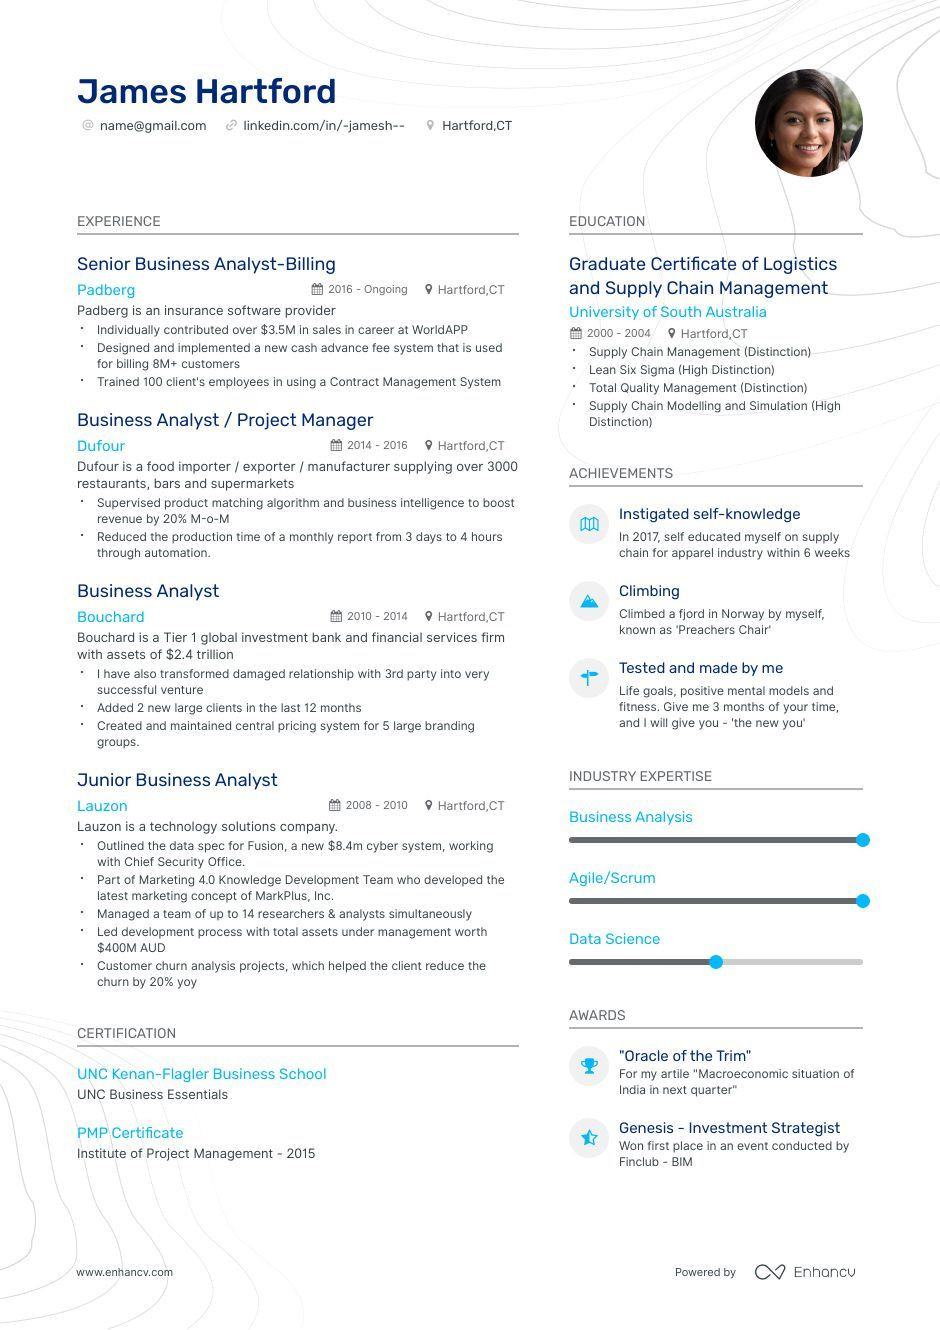 Wealth Management Business Analyst Sample Resume the Best Business Analyst Resume Examples & Guide for 2022 (layout …